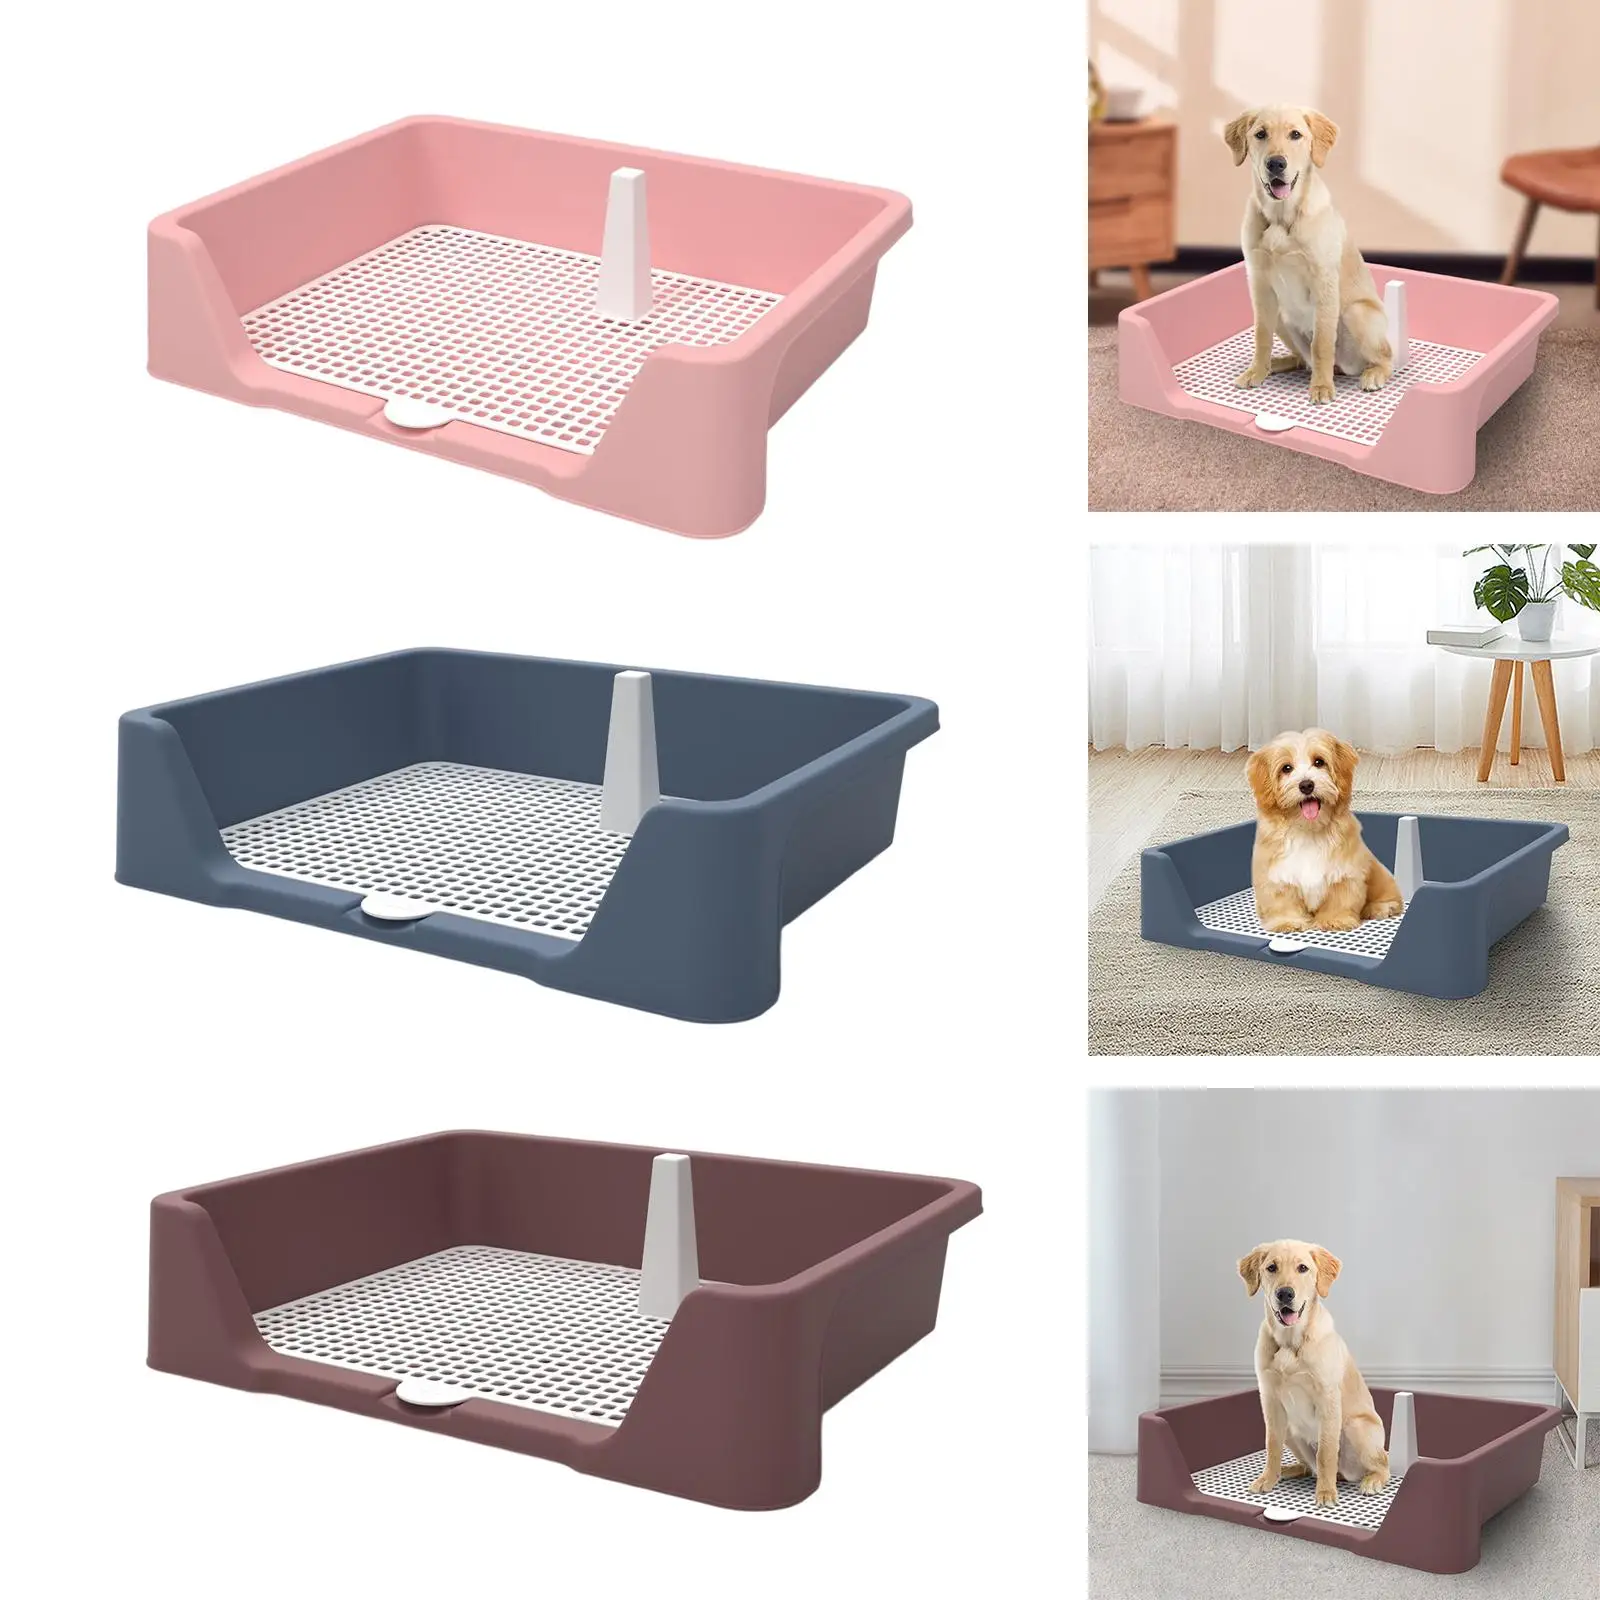 Pet Dog Training Toilet Tray Loo Pad Bedpan Splashproof Non Slip Dog Potty Tray Puppy Pads for Small Medium and Large Dogs Bunny